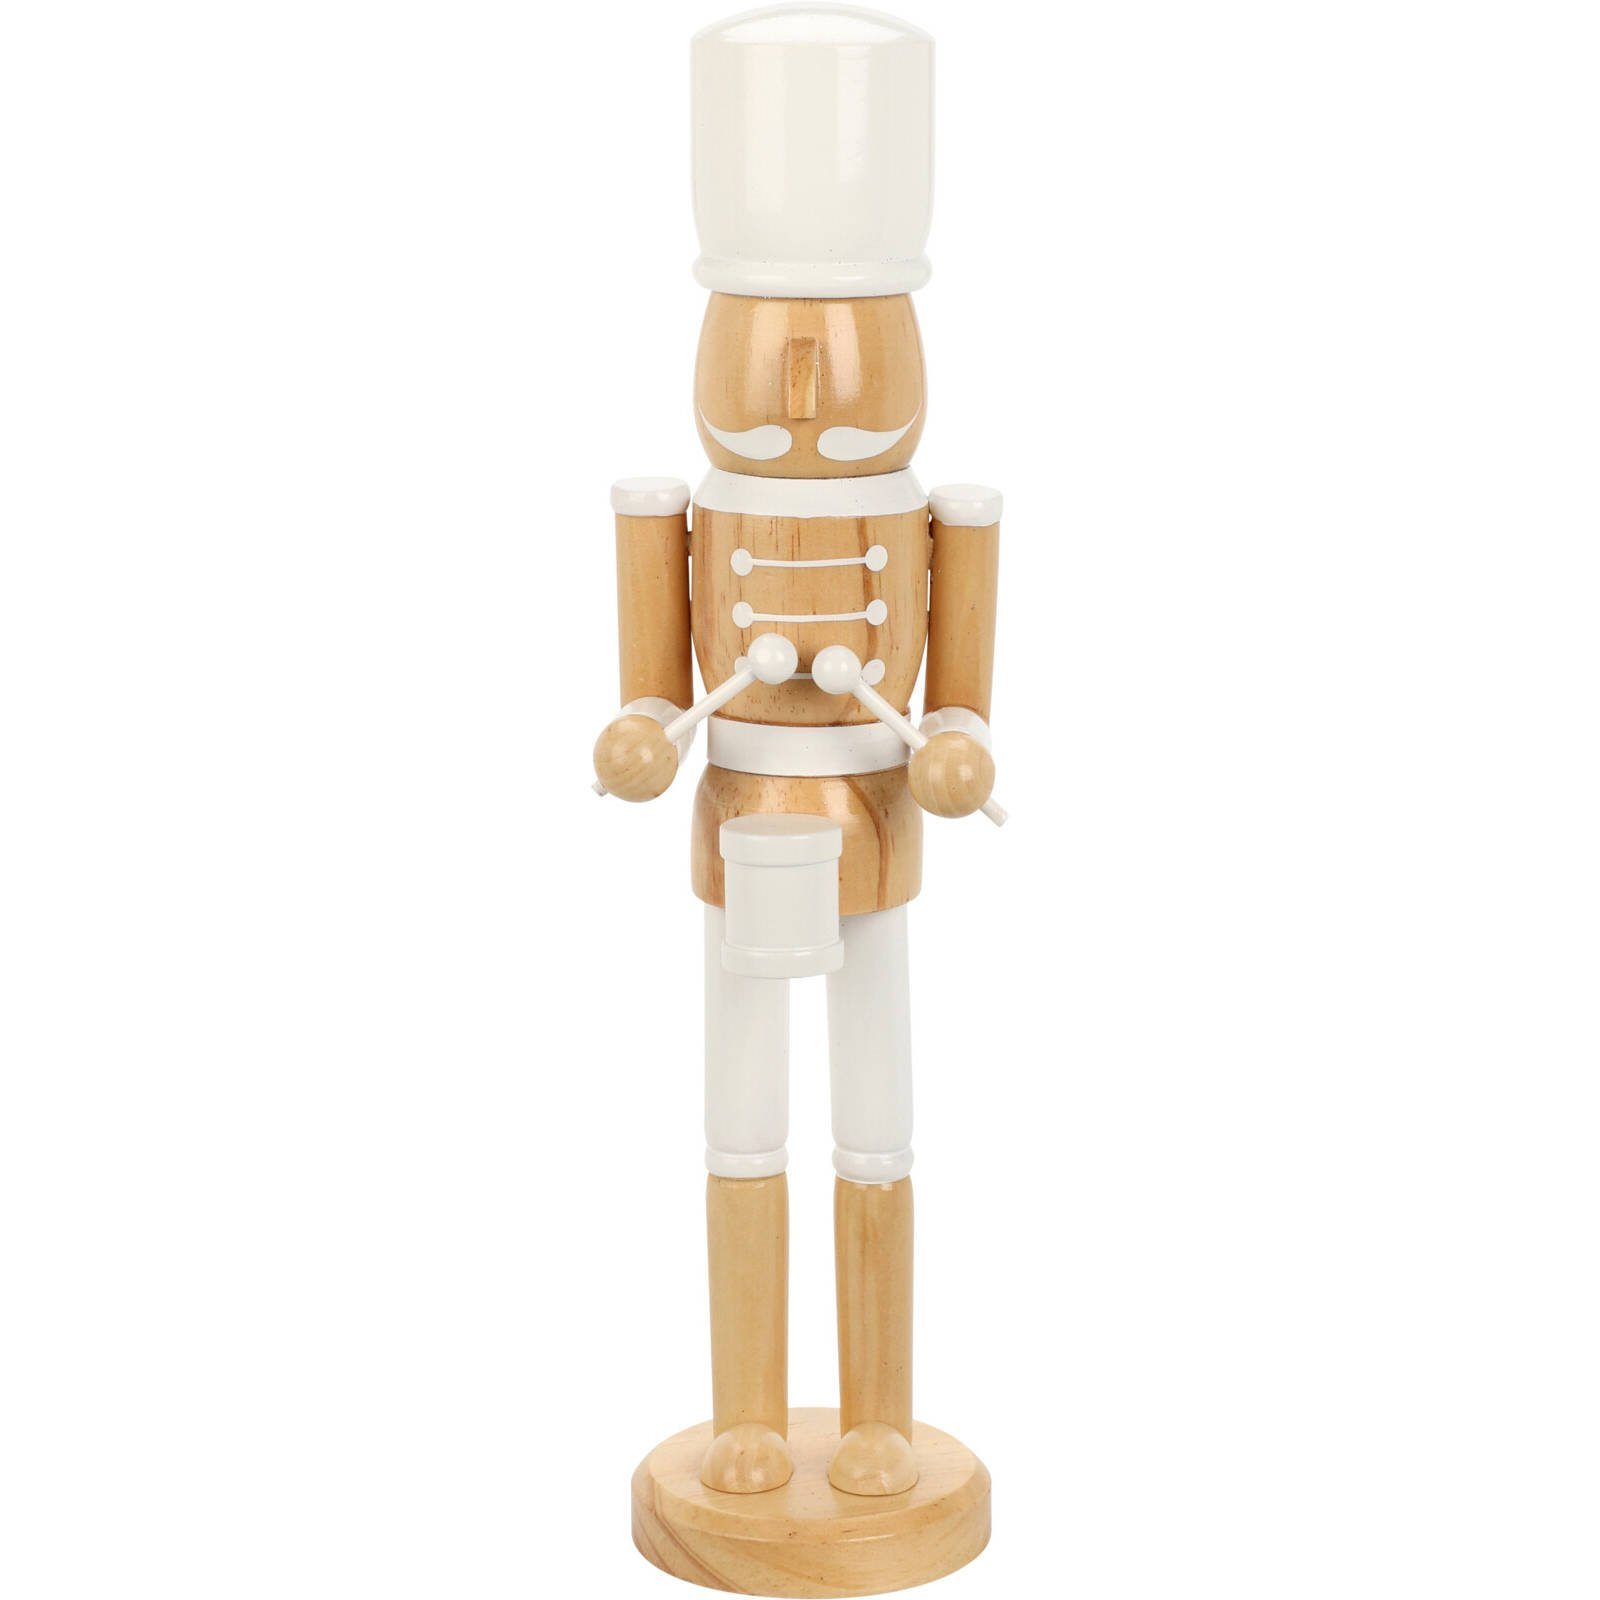 Muster Nussknacker Weihnachtsfigur Home 2 styling & collection